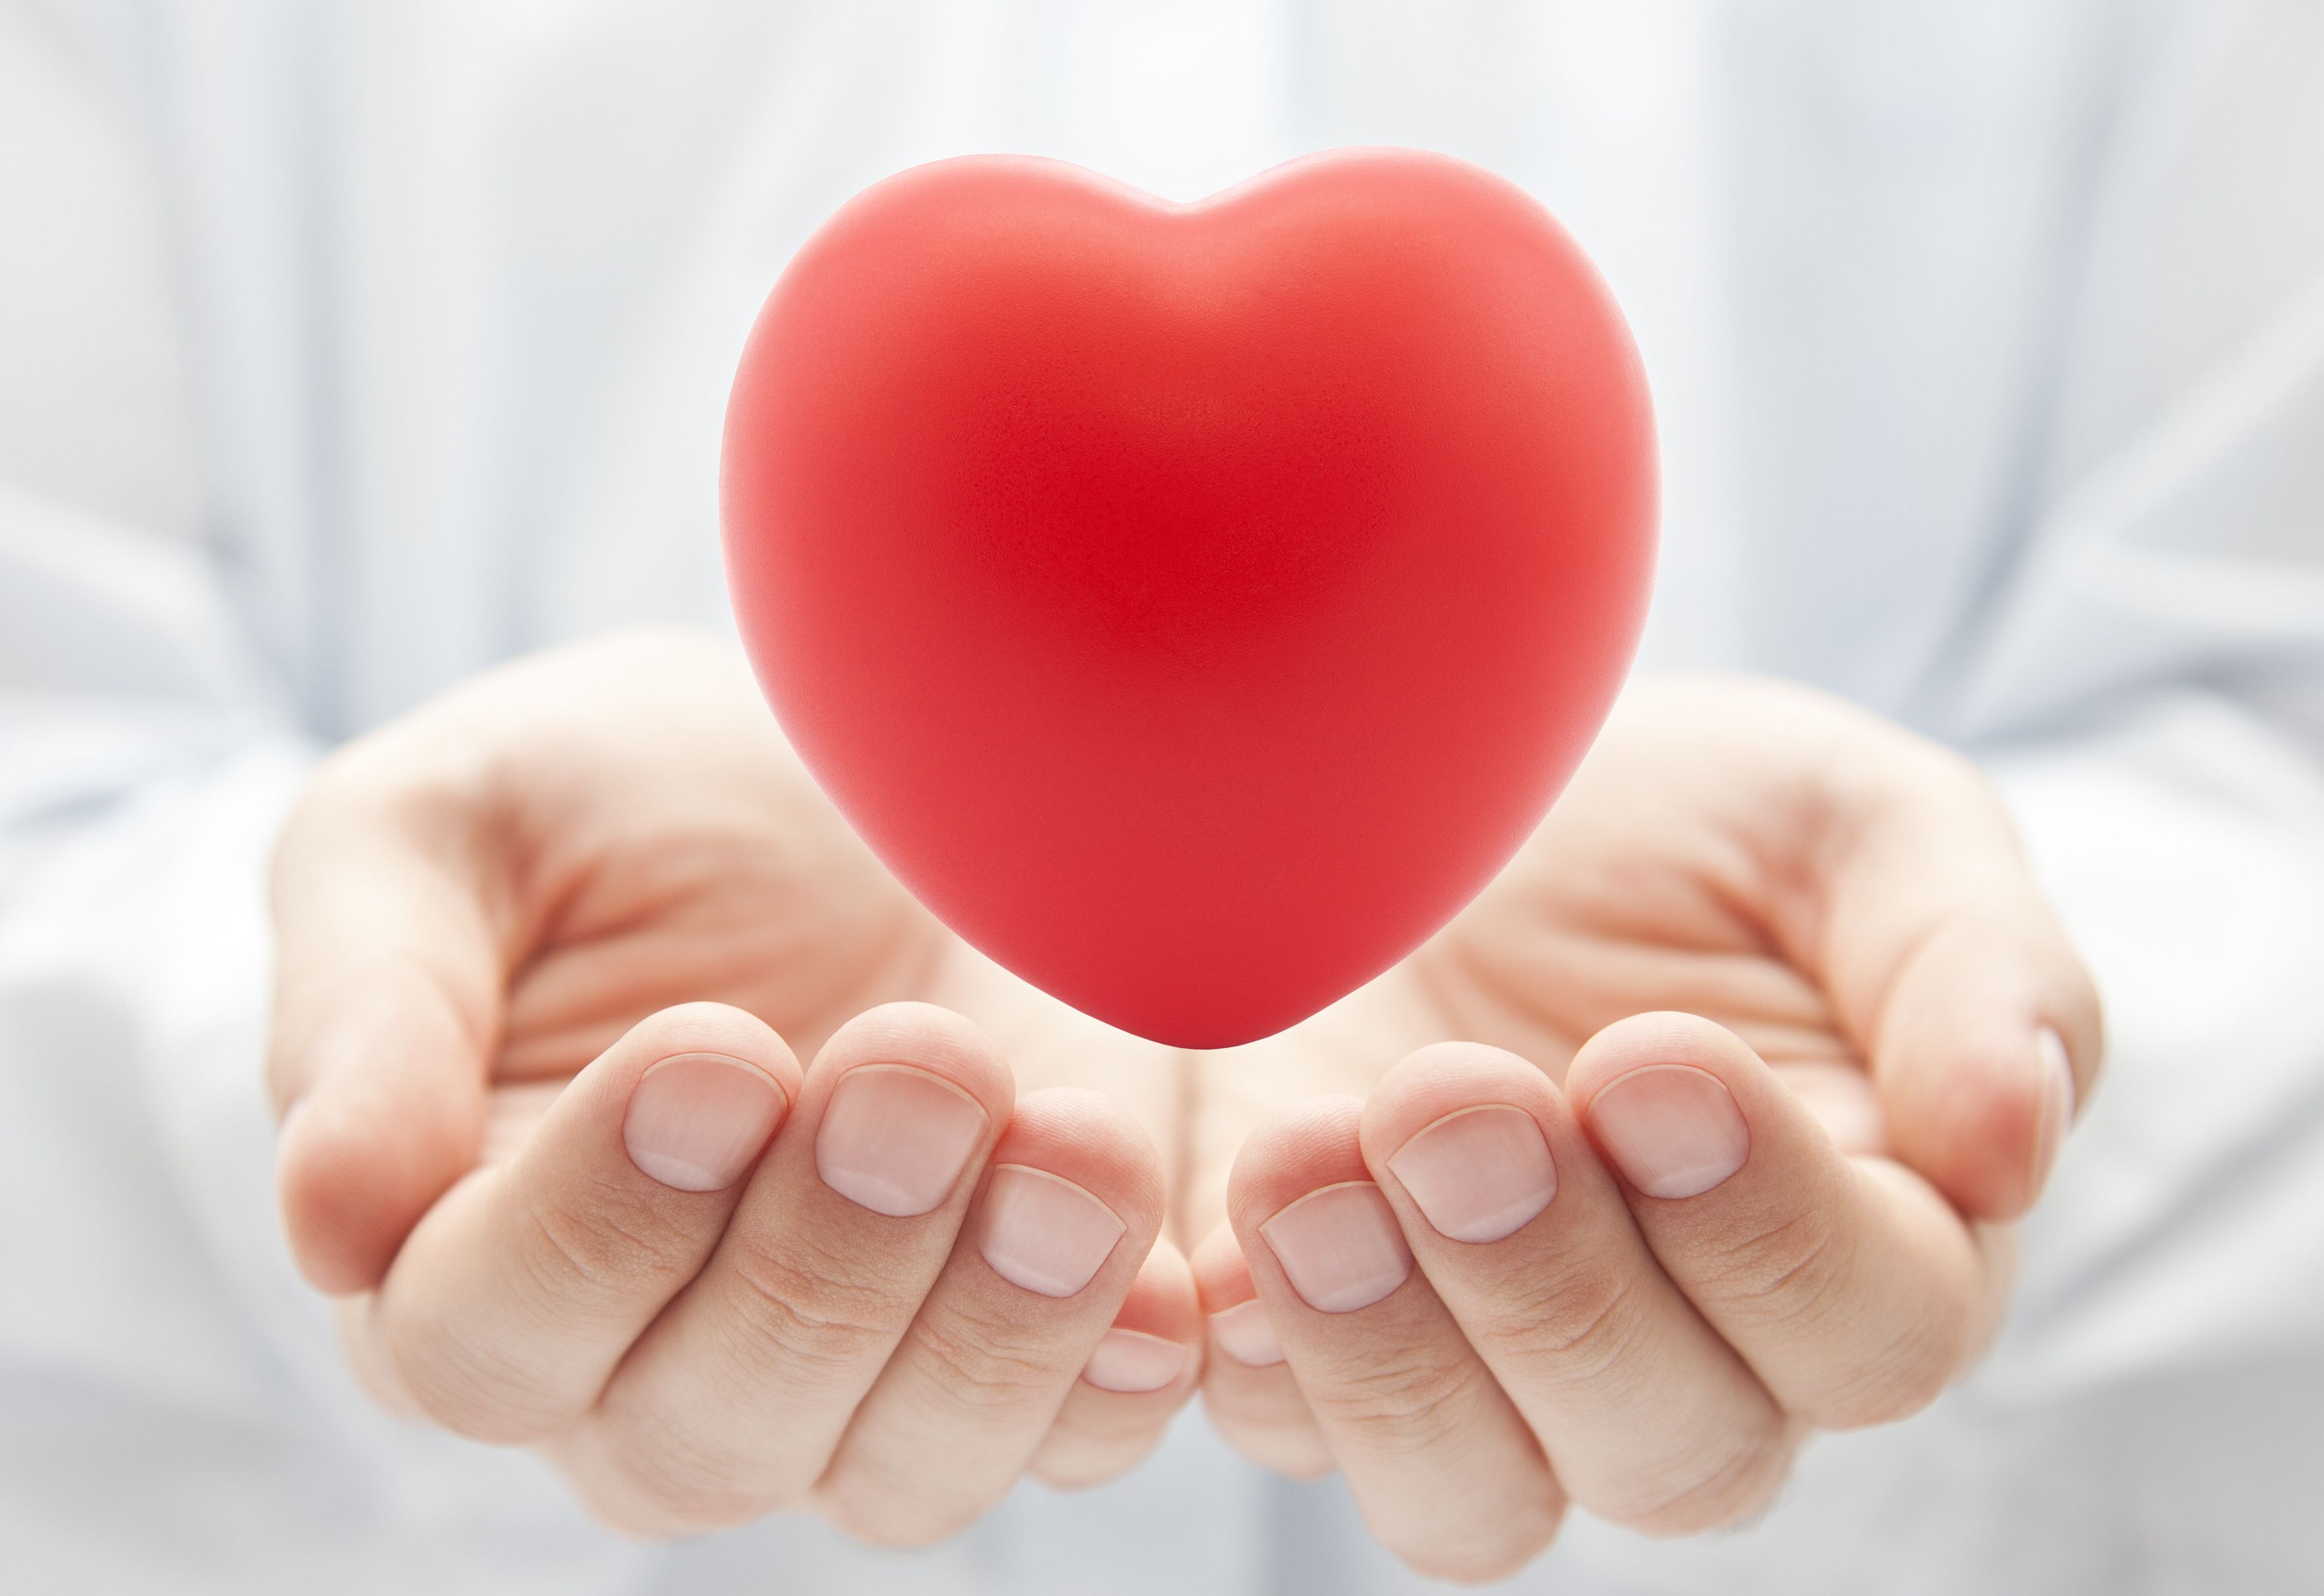 Stock photo of a woman holding a heart-shaped item.